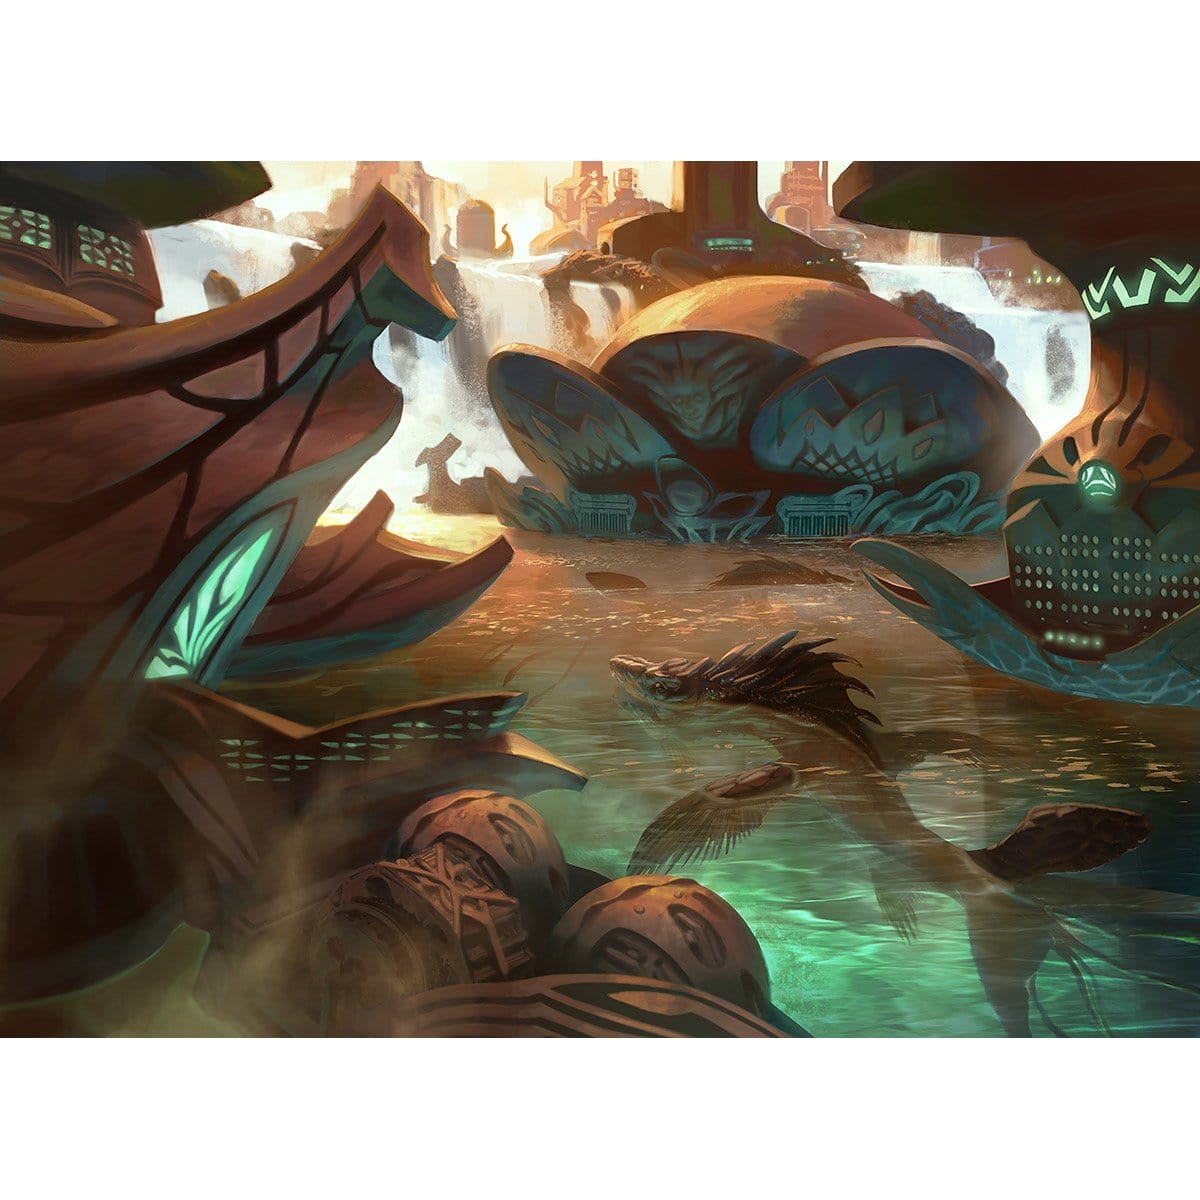 Breeding Pool Print - Print - Original Magic Art - Accessories for Magic the Gathering and other card games